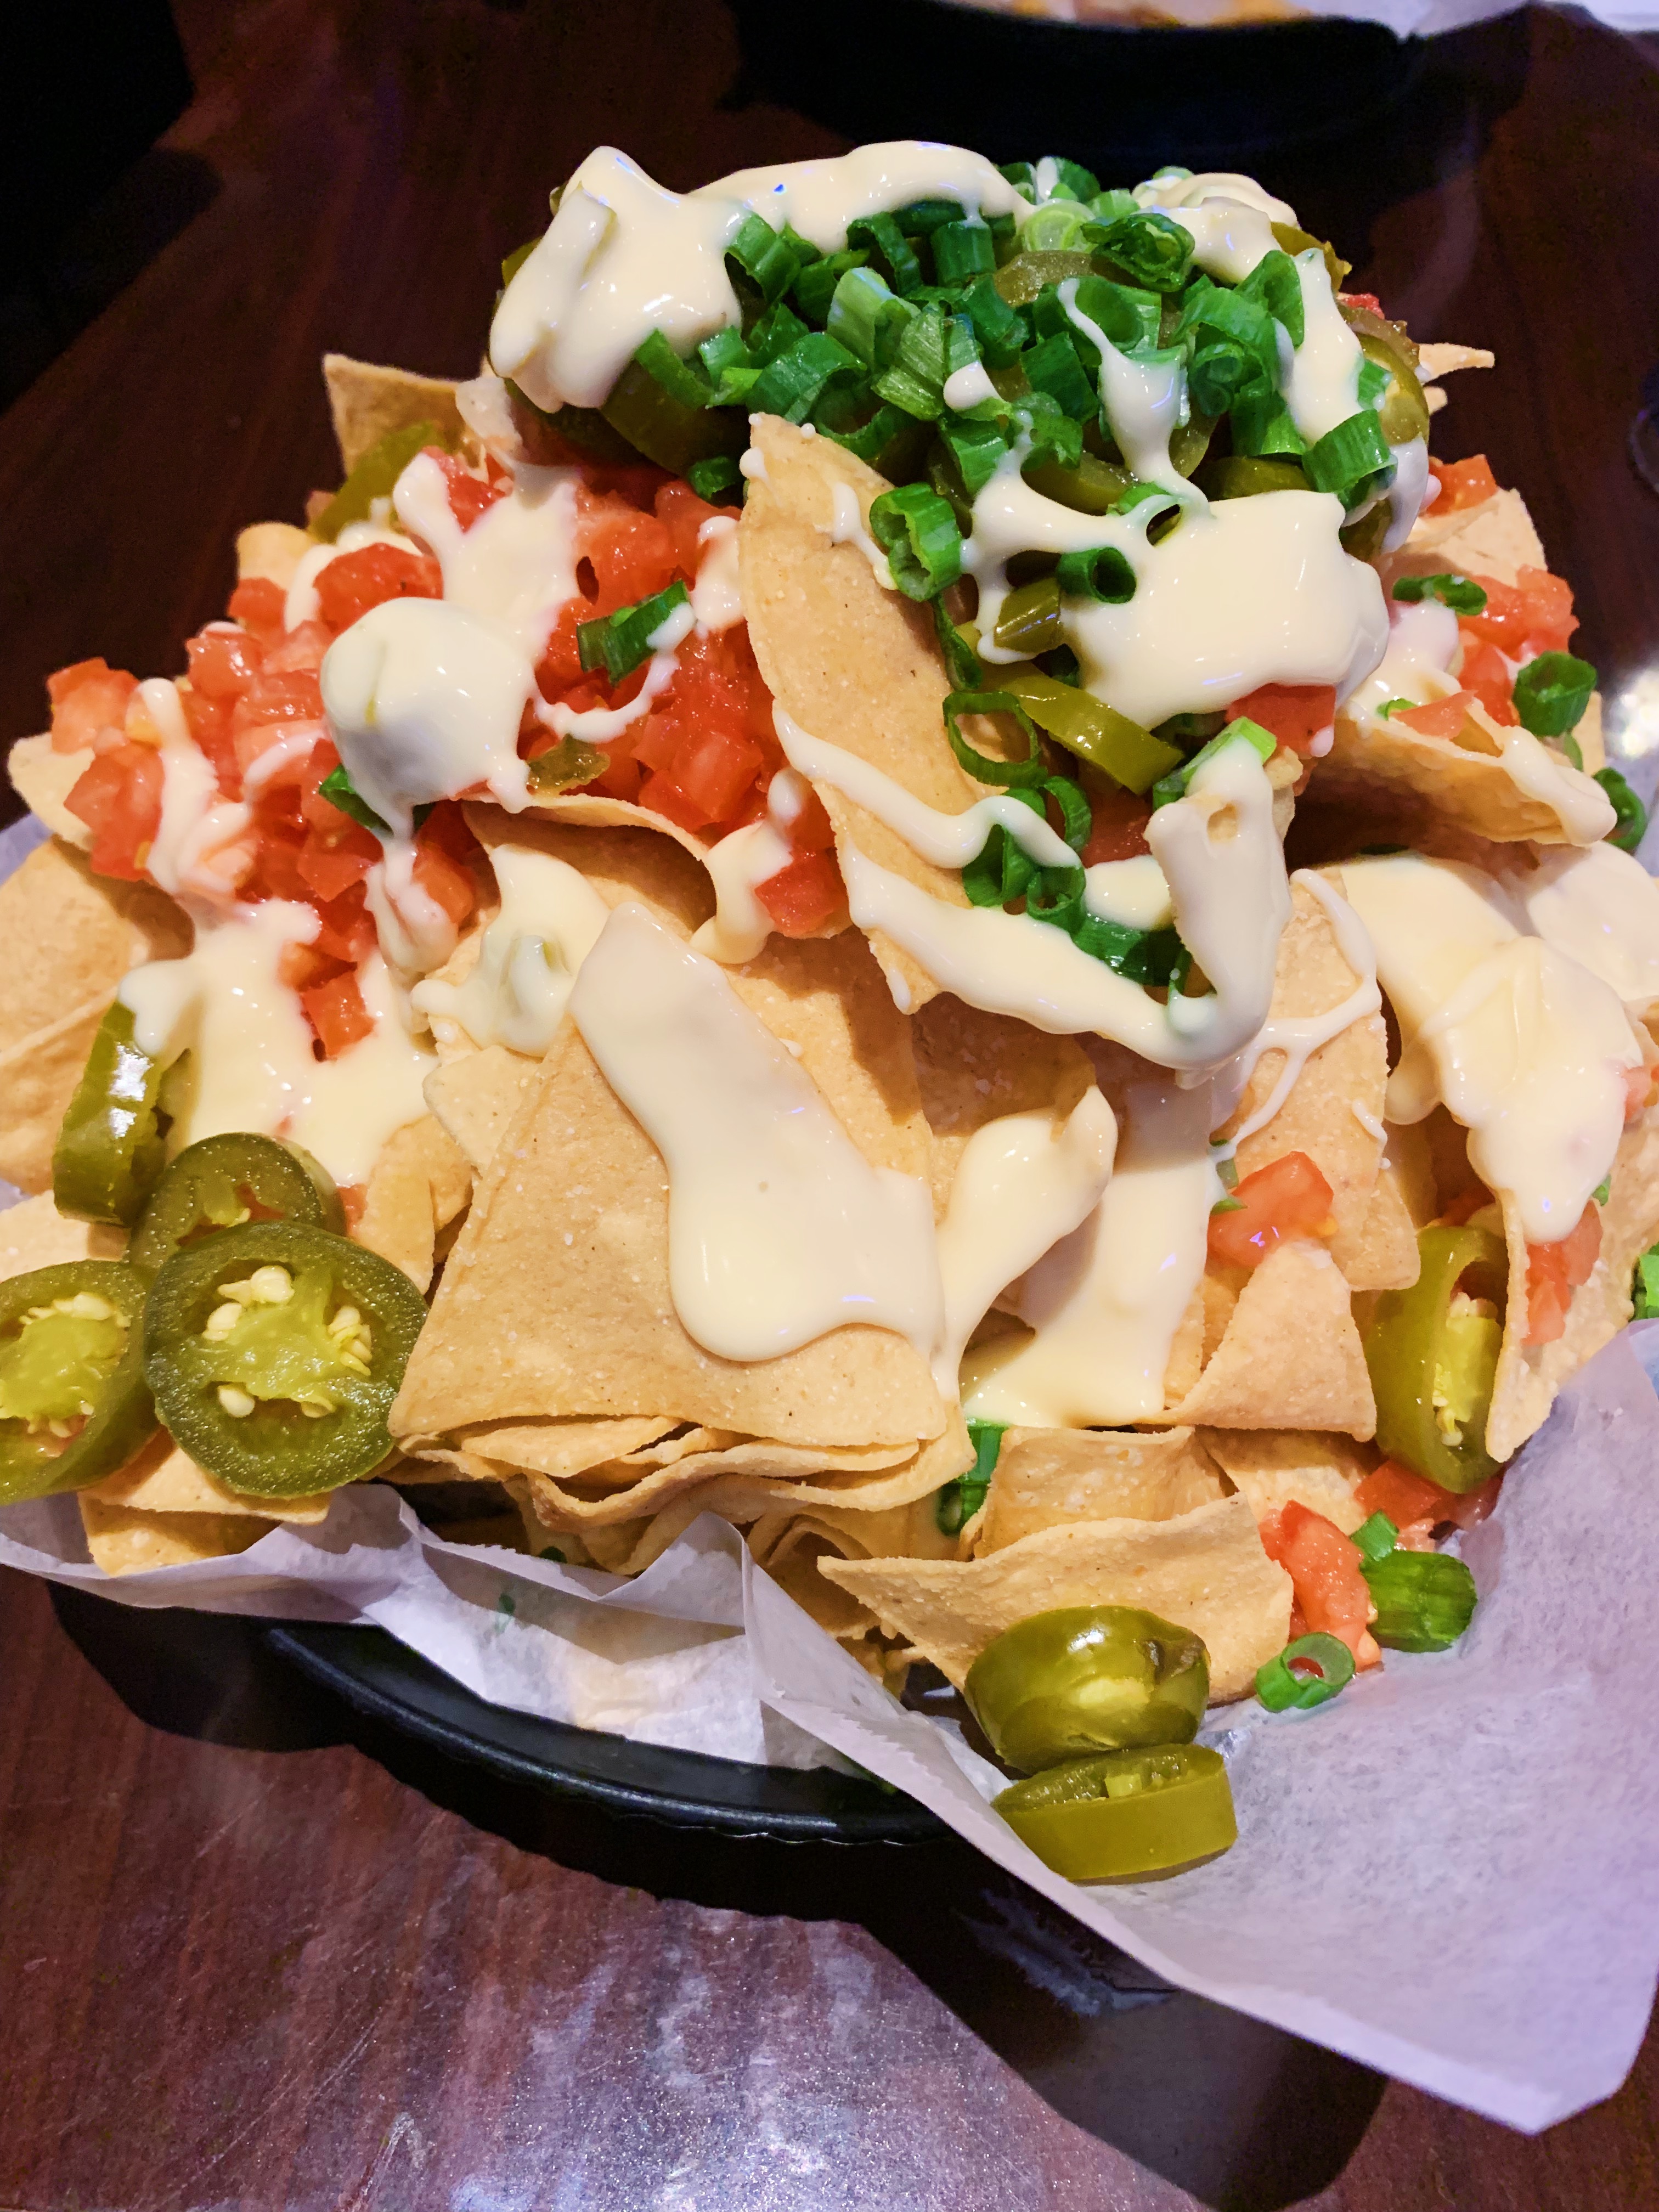 On a brown table, there is a pile of nachos from Billy Barooz. There is cheese, tomatoes, jalapeno, and toppings on many chips. Photo by Anya Uppal.